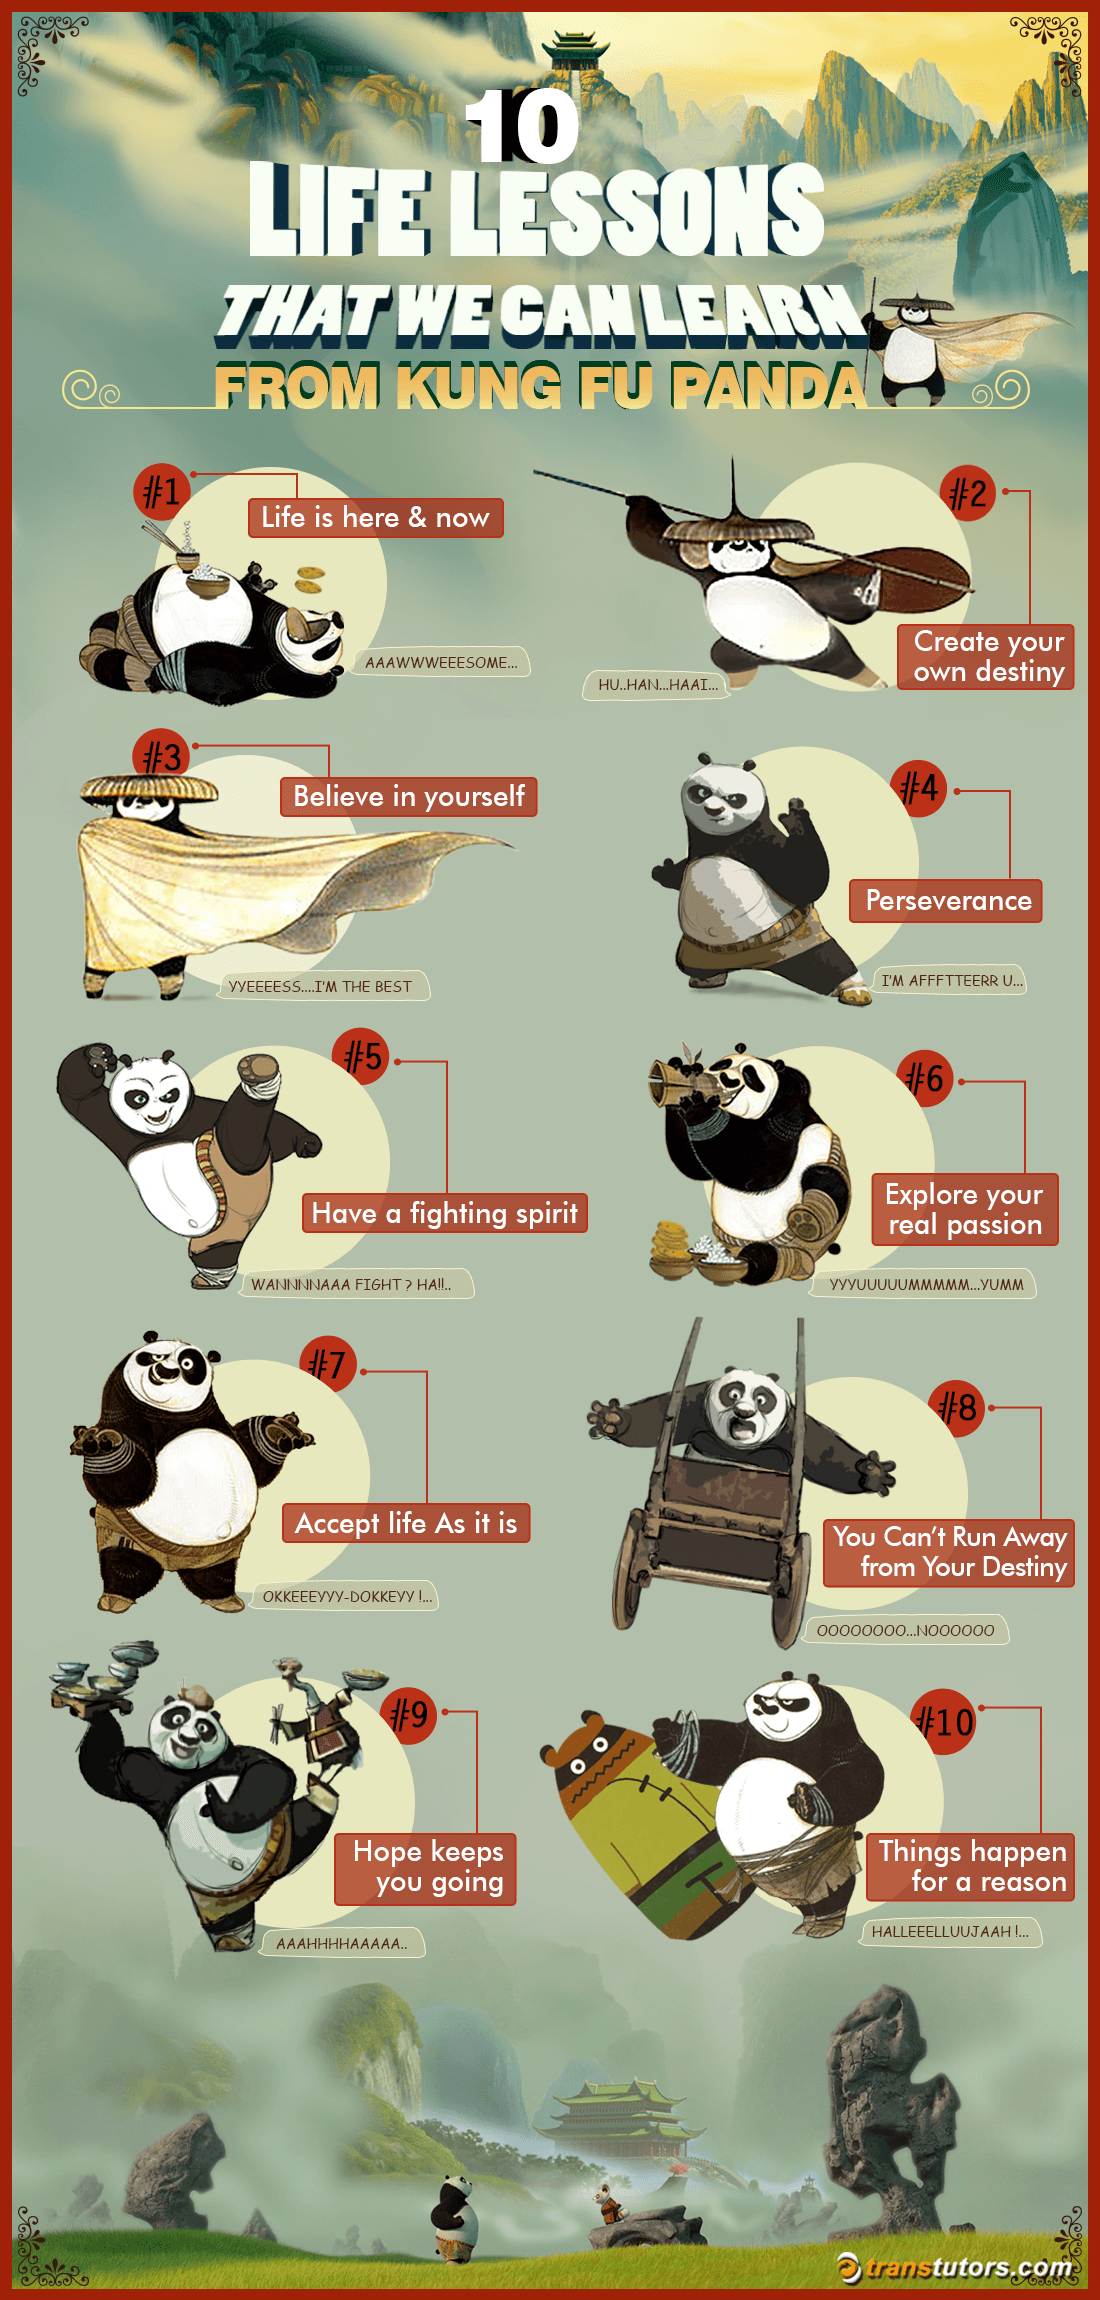 10 Life Lessons From Kung Fu Panda Infographic